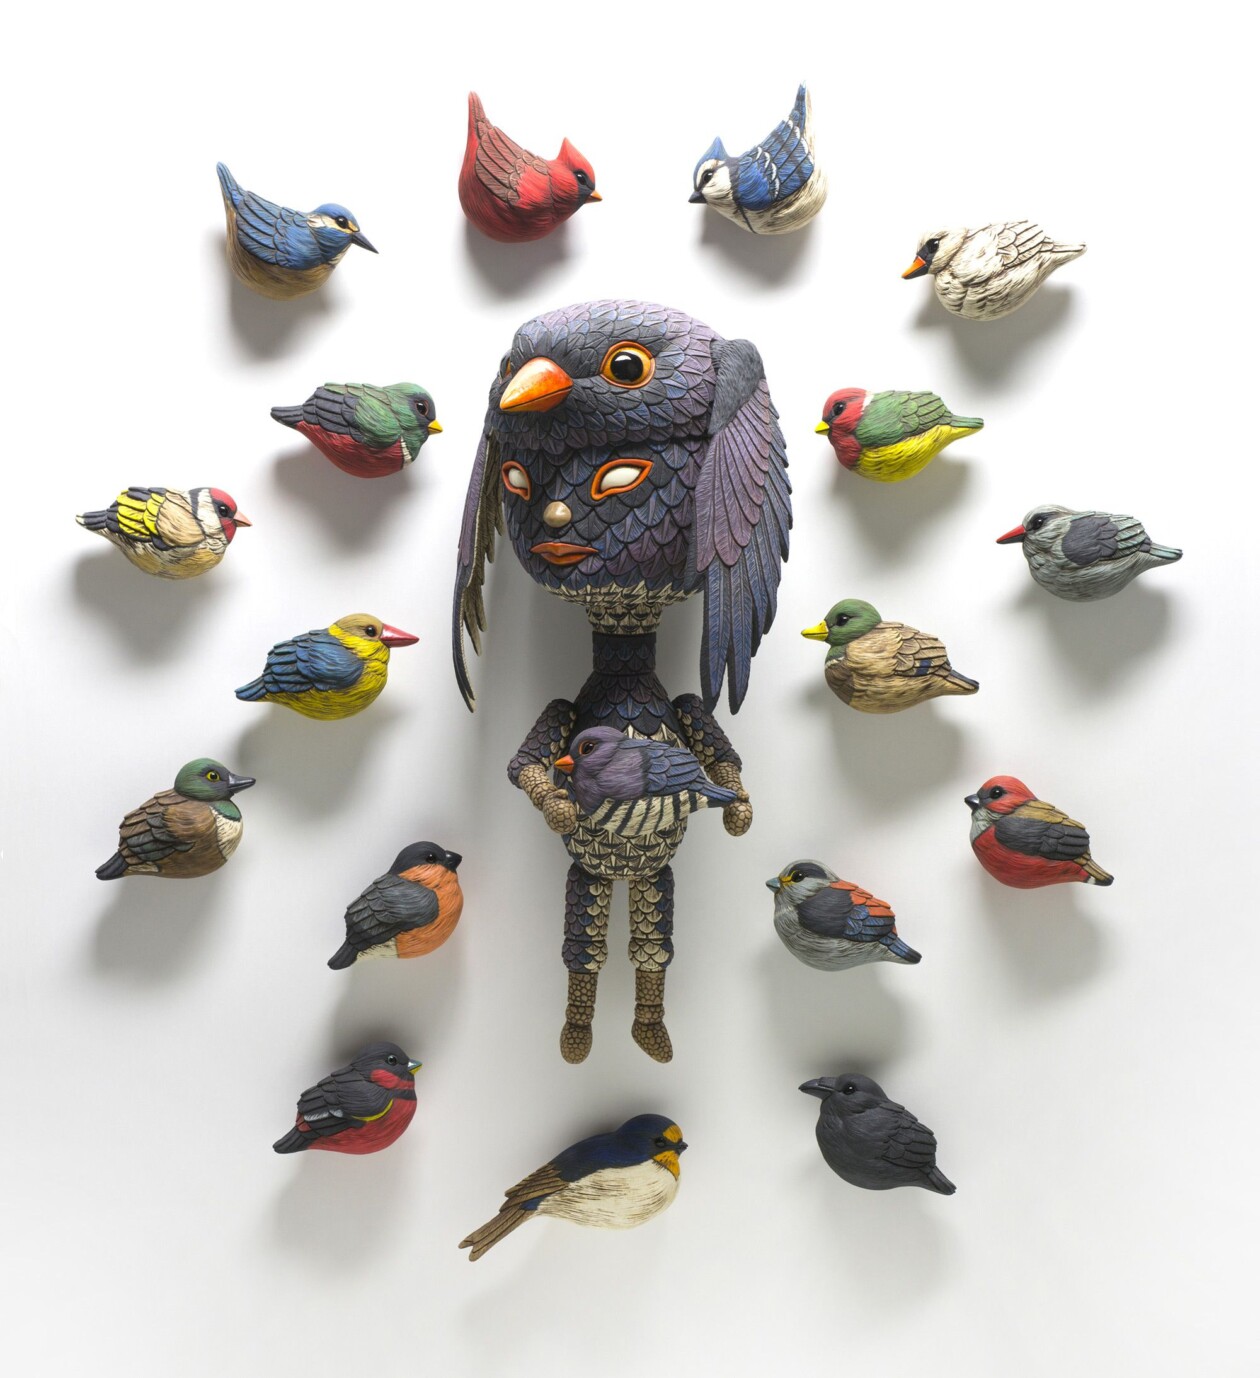 Marvelous Anthropomorphized Bird Sculptures By Calvin Ma (5)